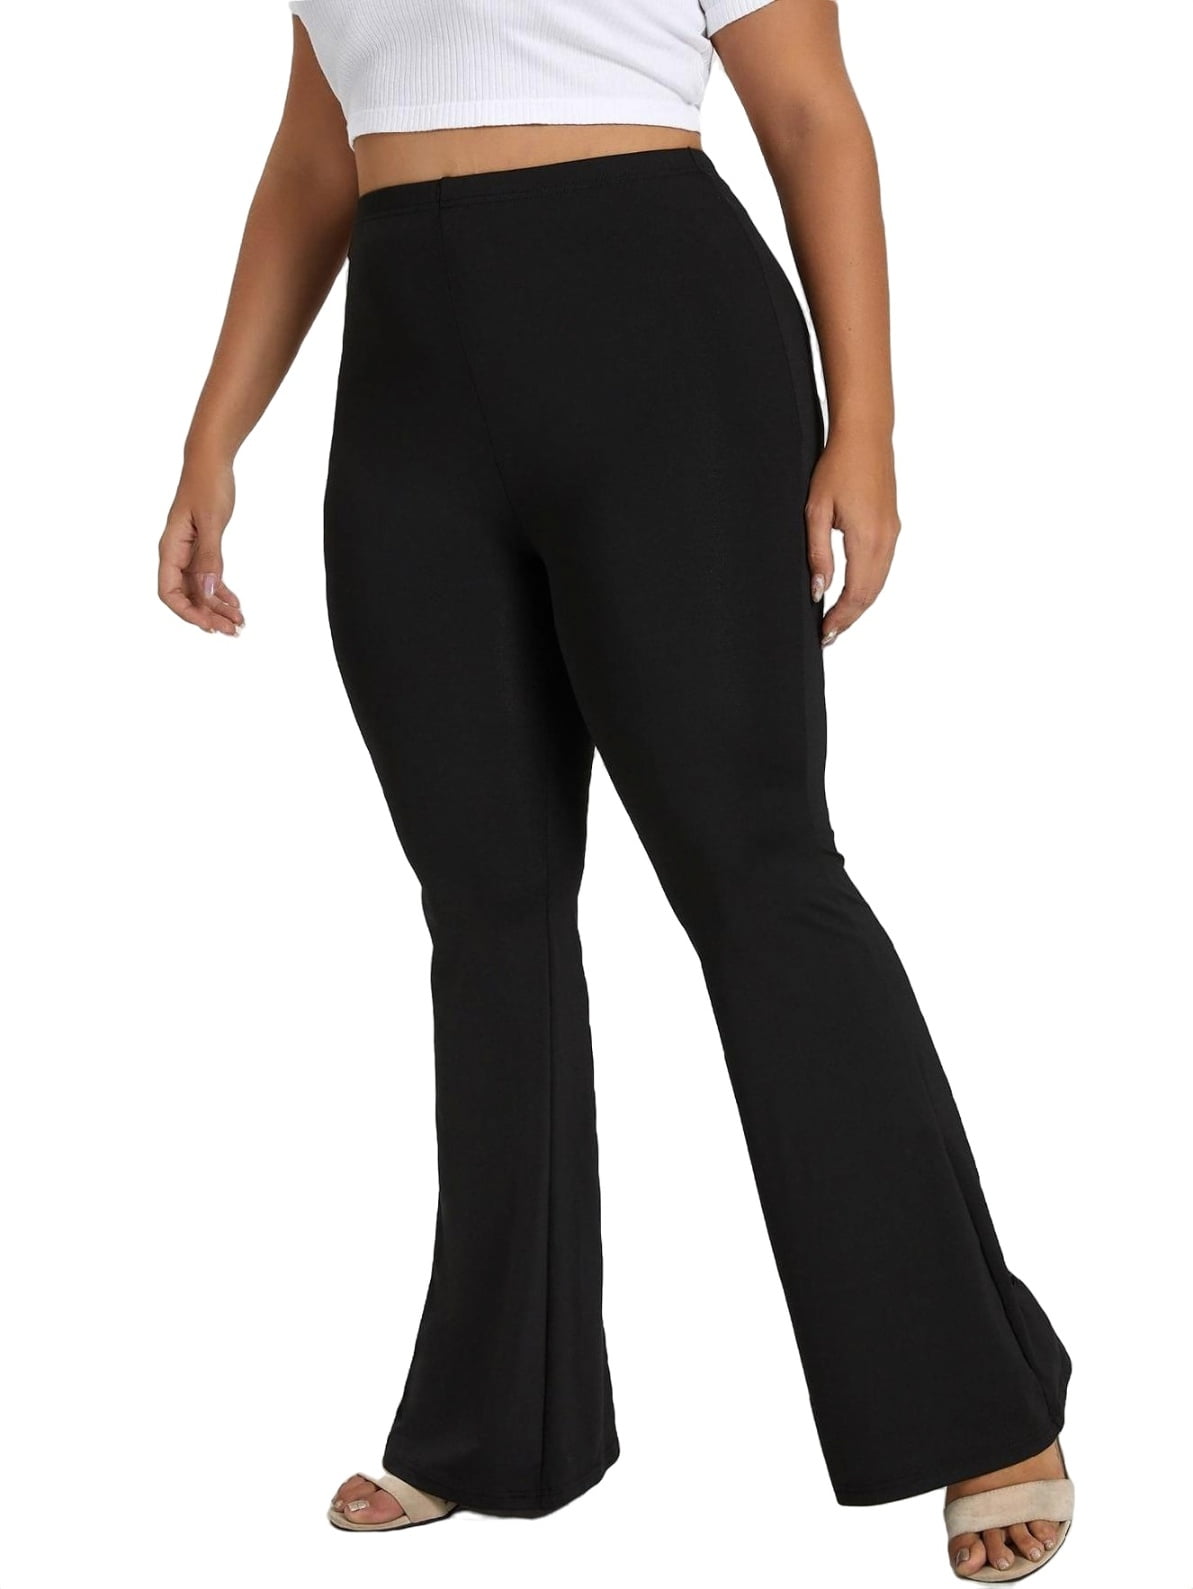 Women's Plus Size High Waist Stretchy Solid Flare Leg Pants Soft ...